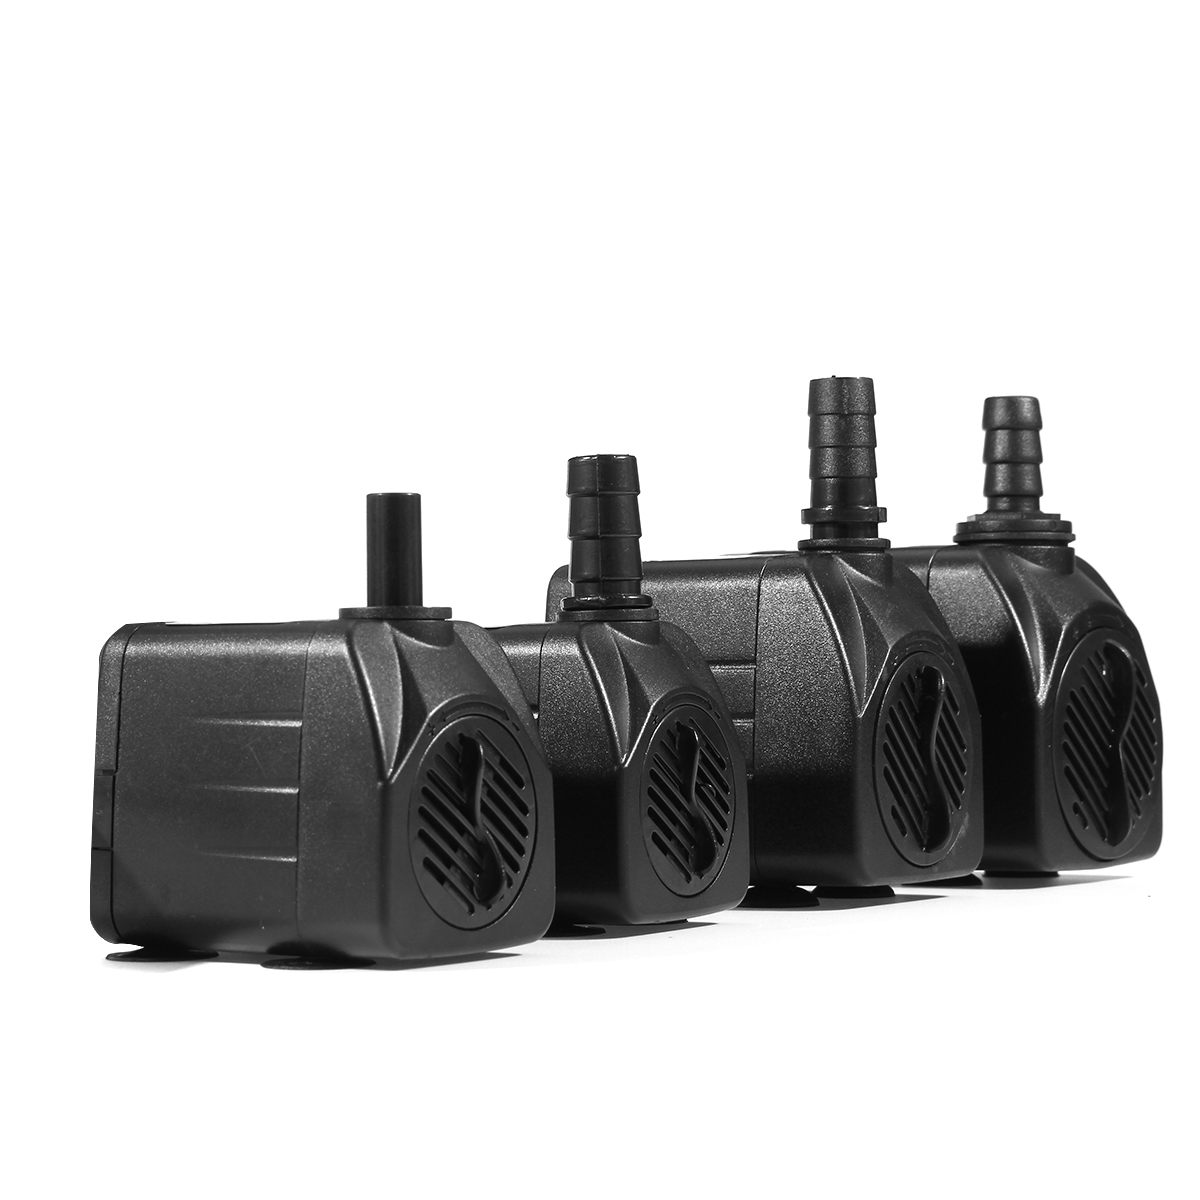 8-25W-Submersible-Water-Pump-Oxygen-Pump-Electric-Water-Feature-Pump-Small-Fountain-Garden-Fish-Pond-1541724-4